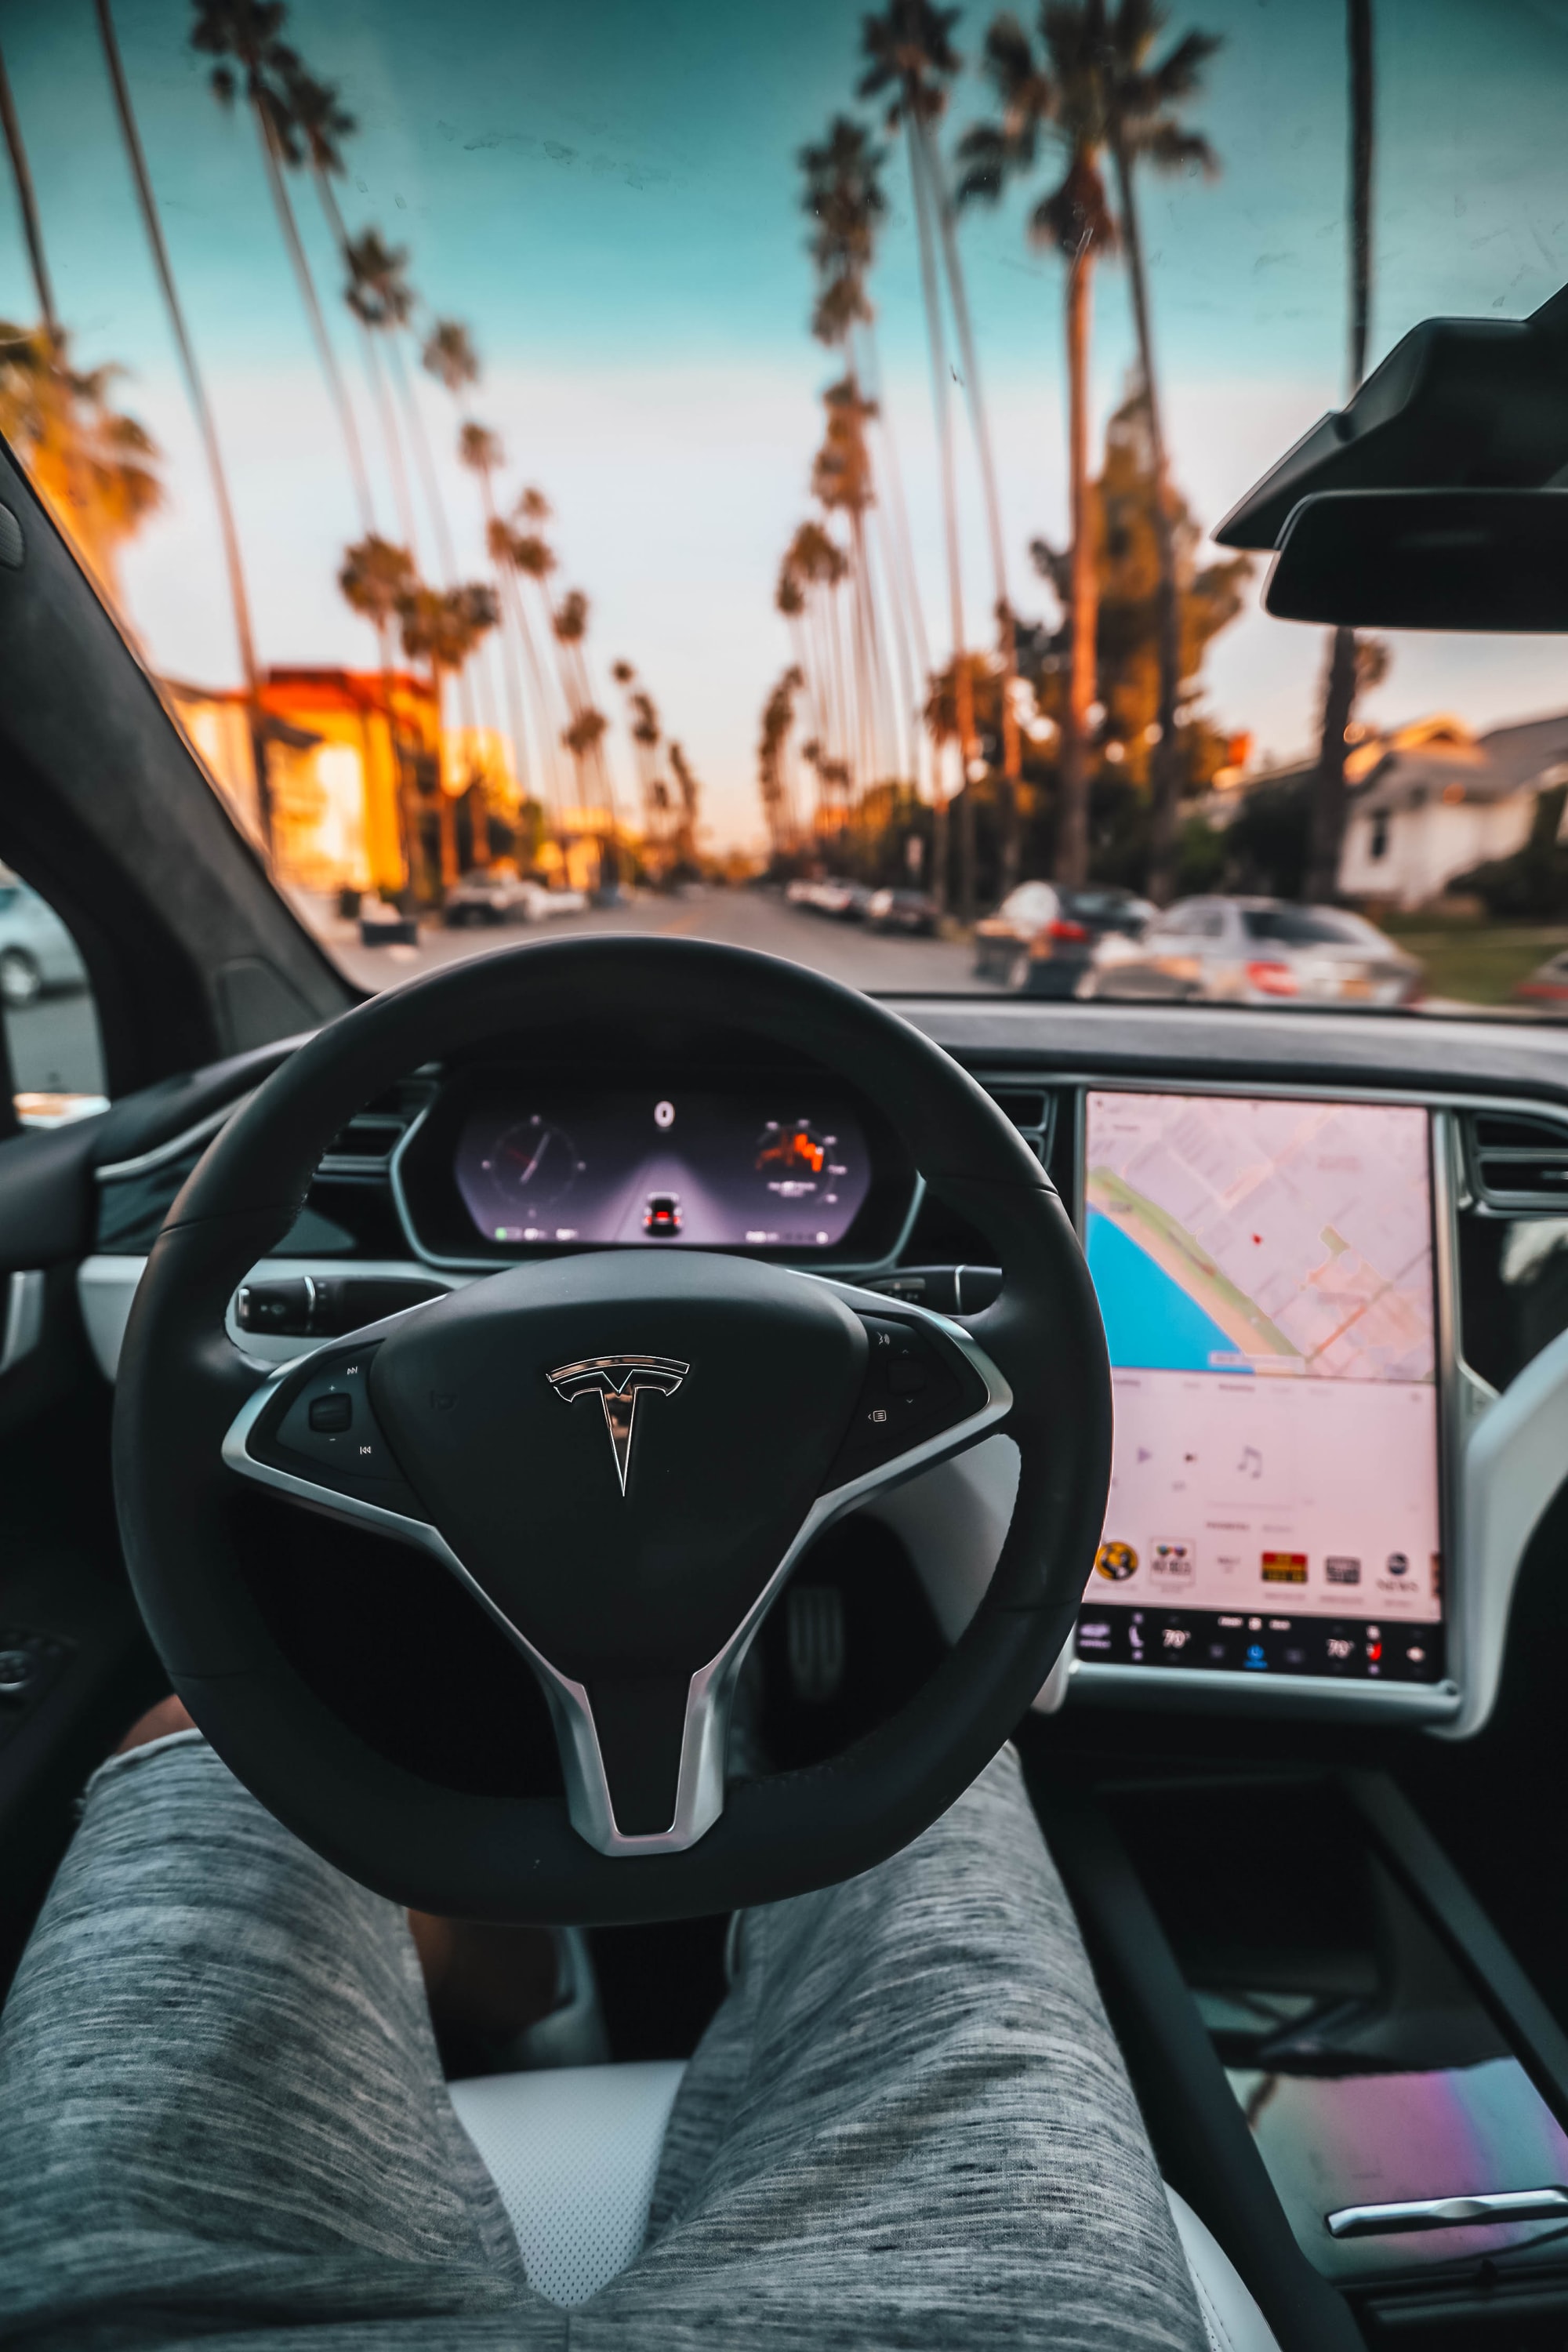 📹 First videos of Tesla's Full-Self Driving beta - see the revolution